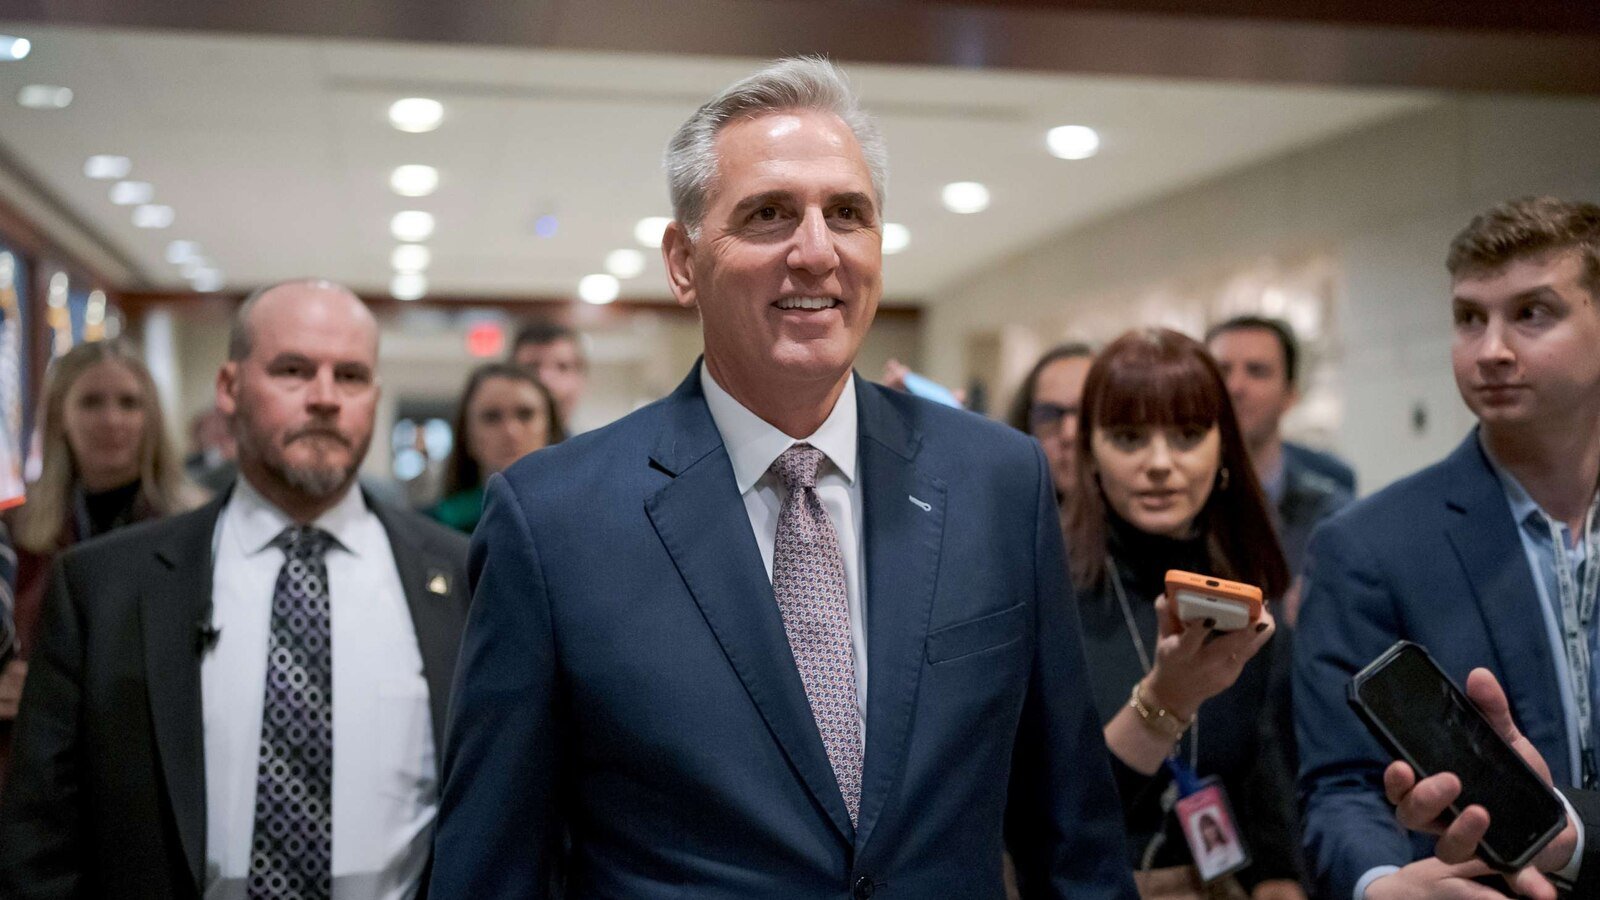 McCarthy clinches GOP nomination for speaker of the House despite challenger: Sources